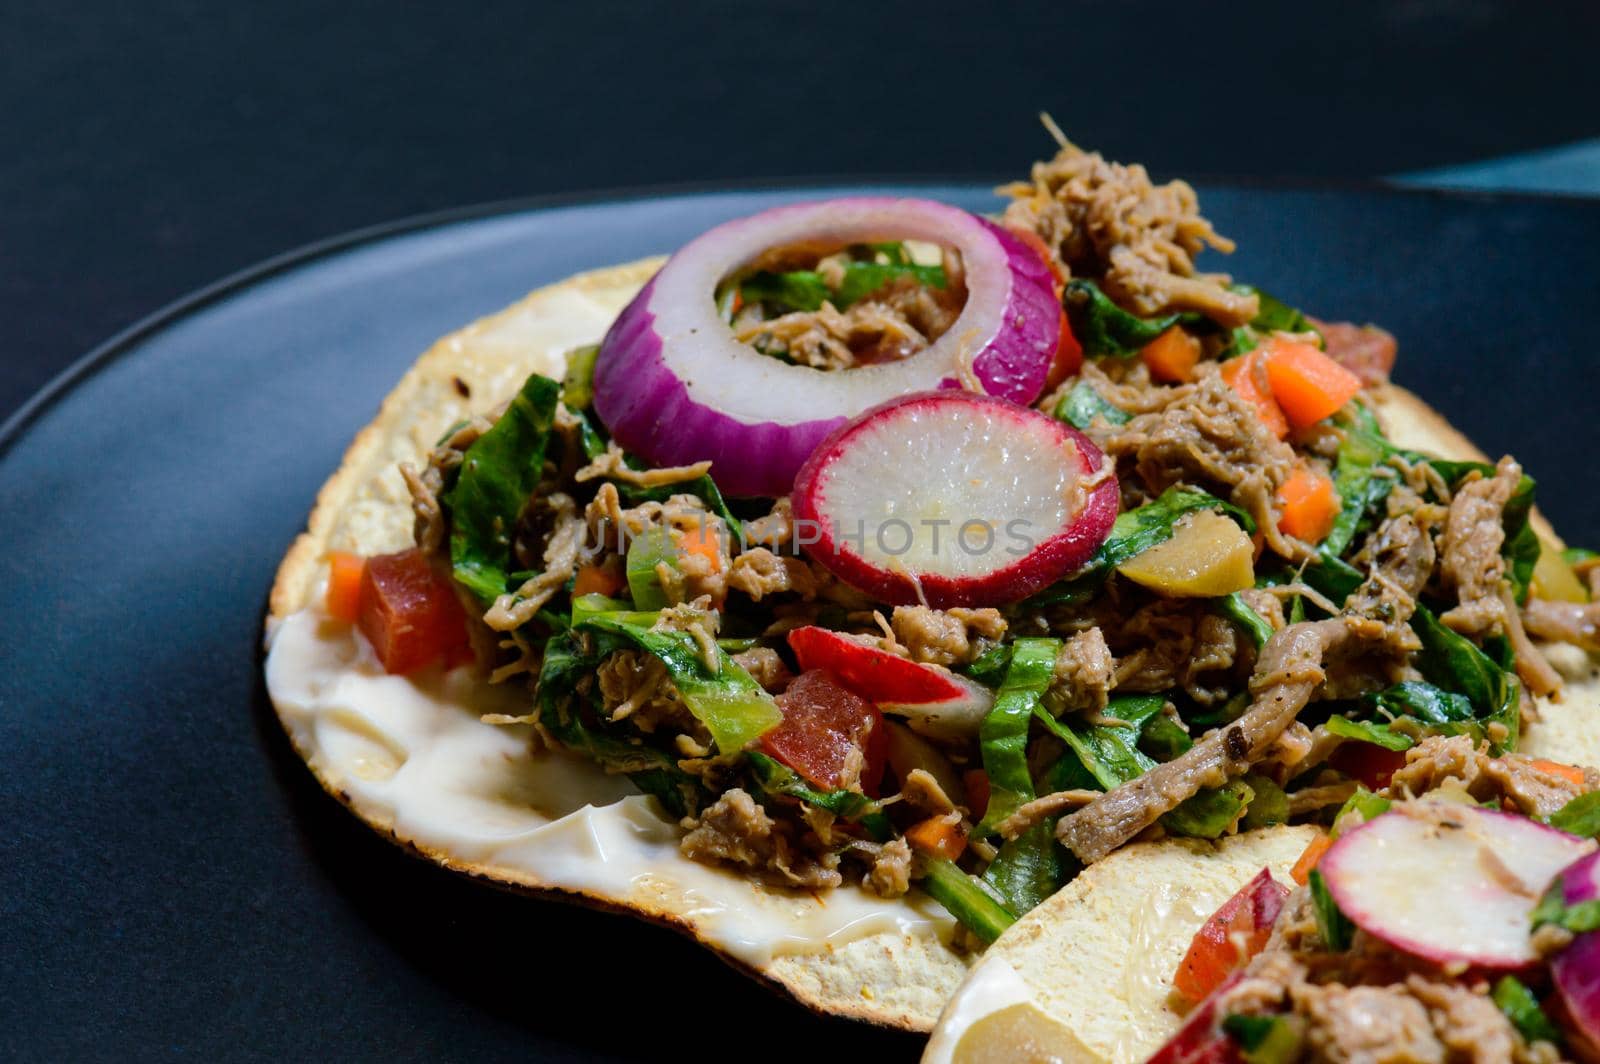 Beef salpicon on corn tostadas. Mexican spicy beef steak salad with carrot, olives, chili, onion, lettuce and radish. Delicious Mexican cuisine